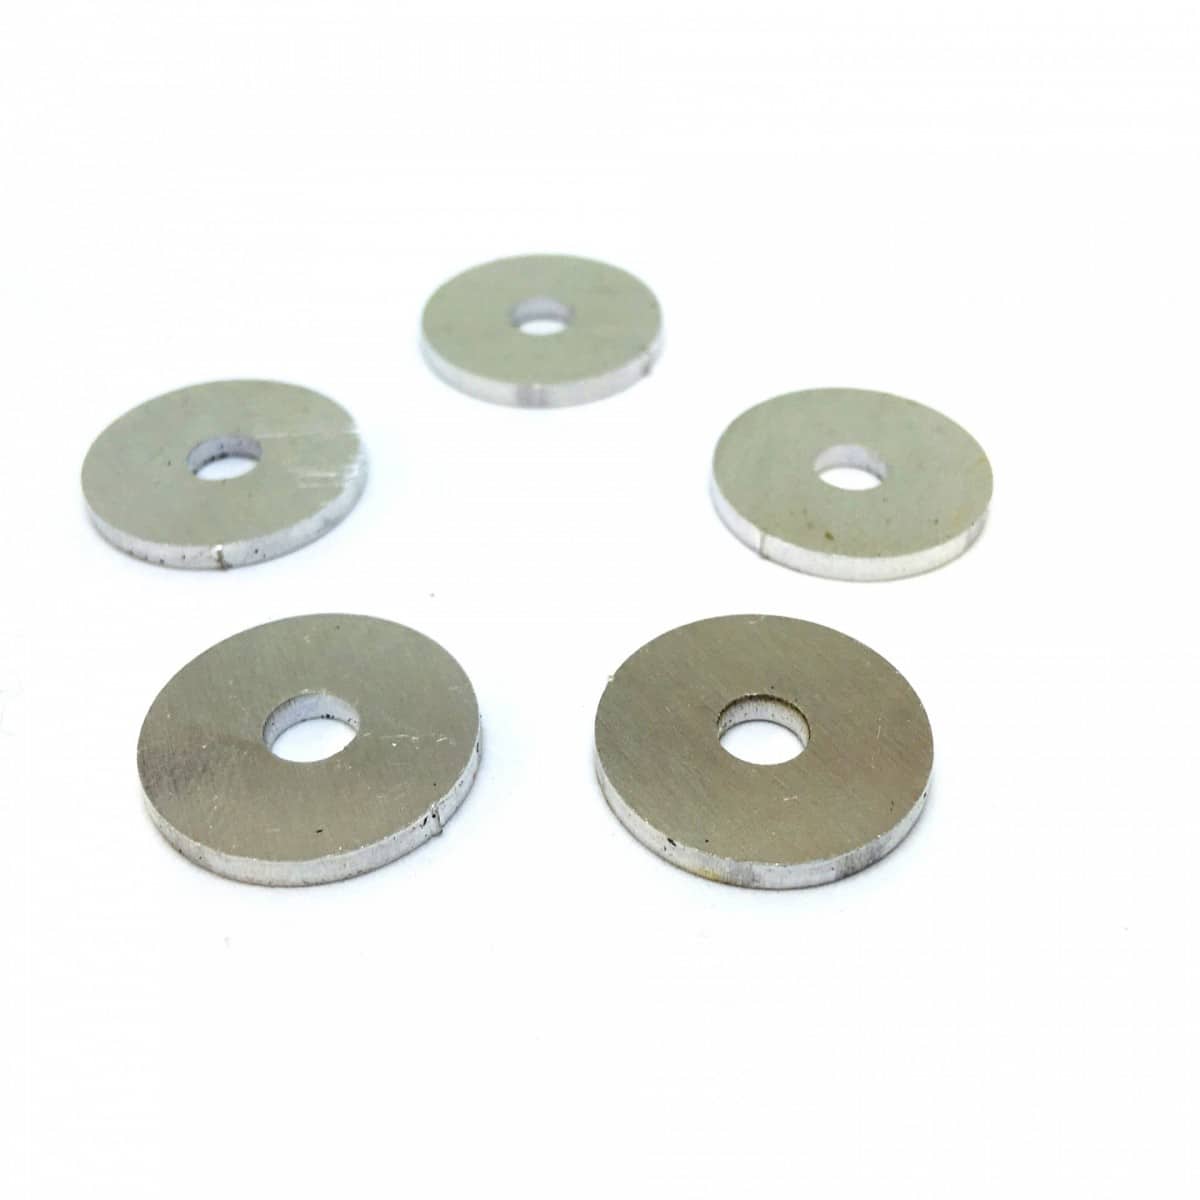 EPES Piston head AOE spacer pad 2.0mm - 5 pack